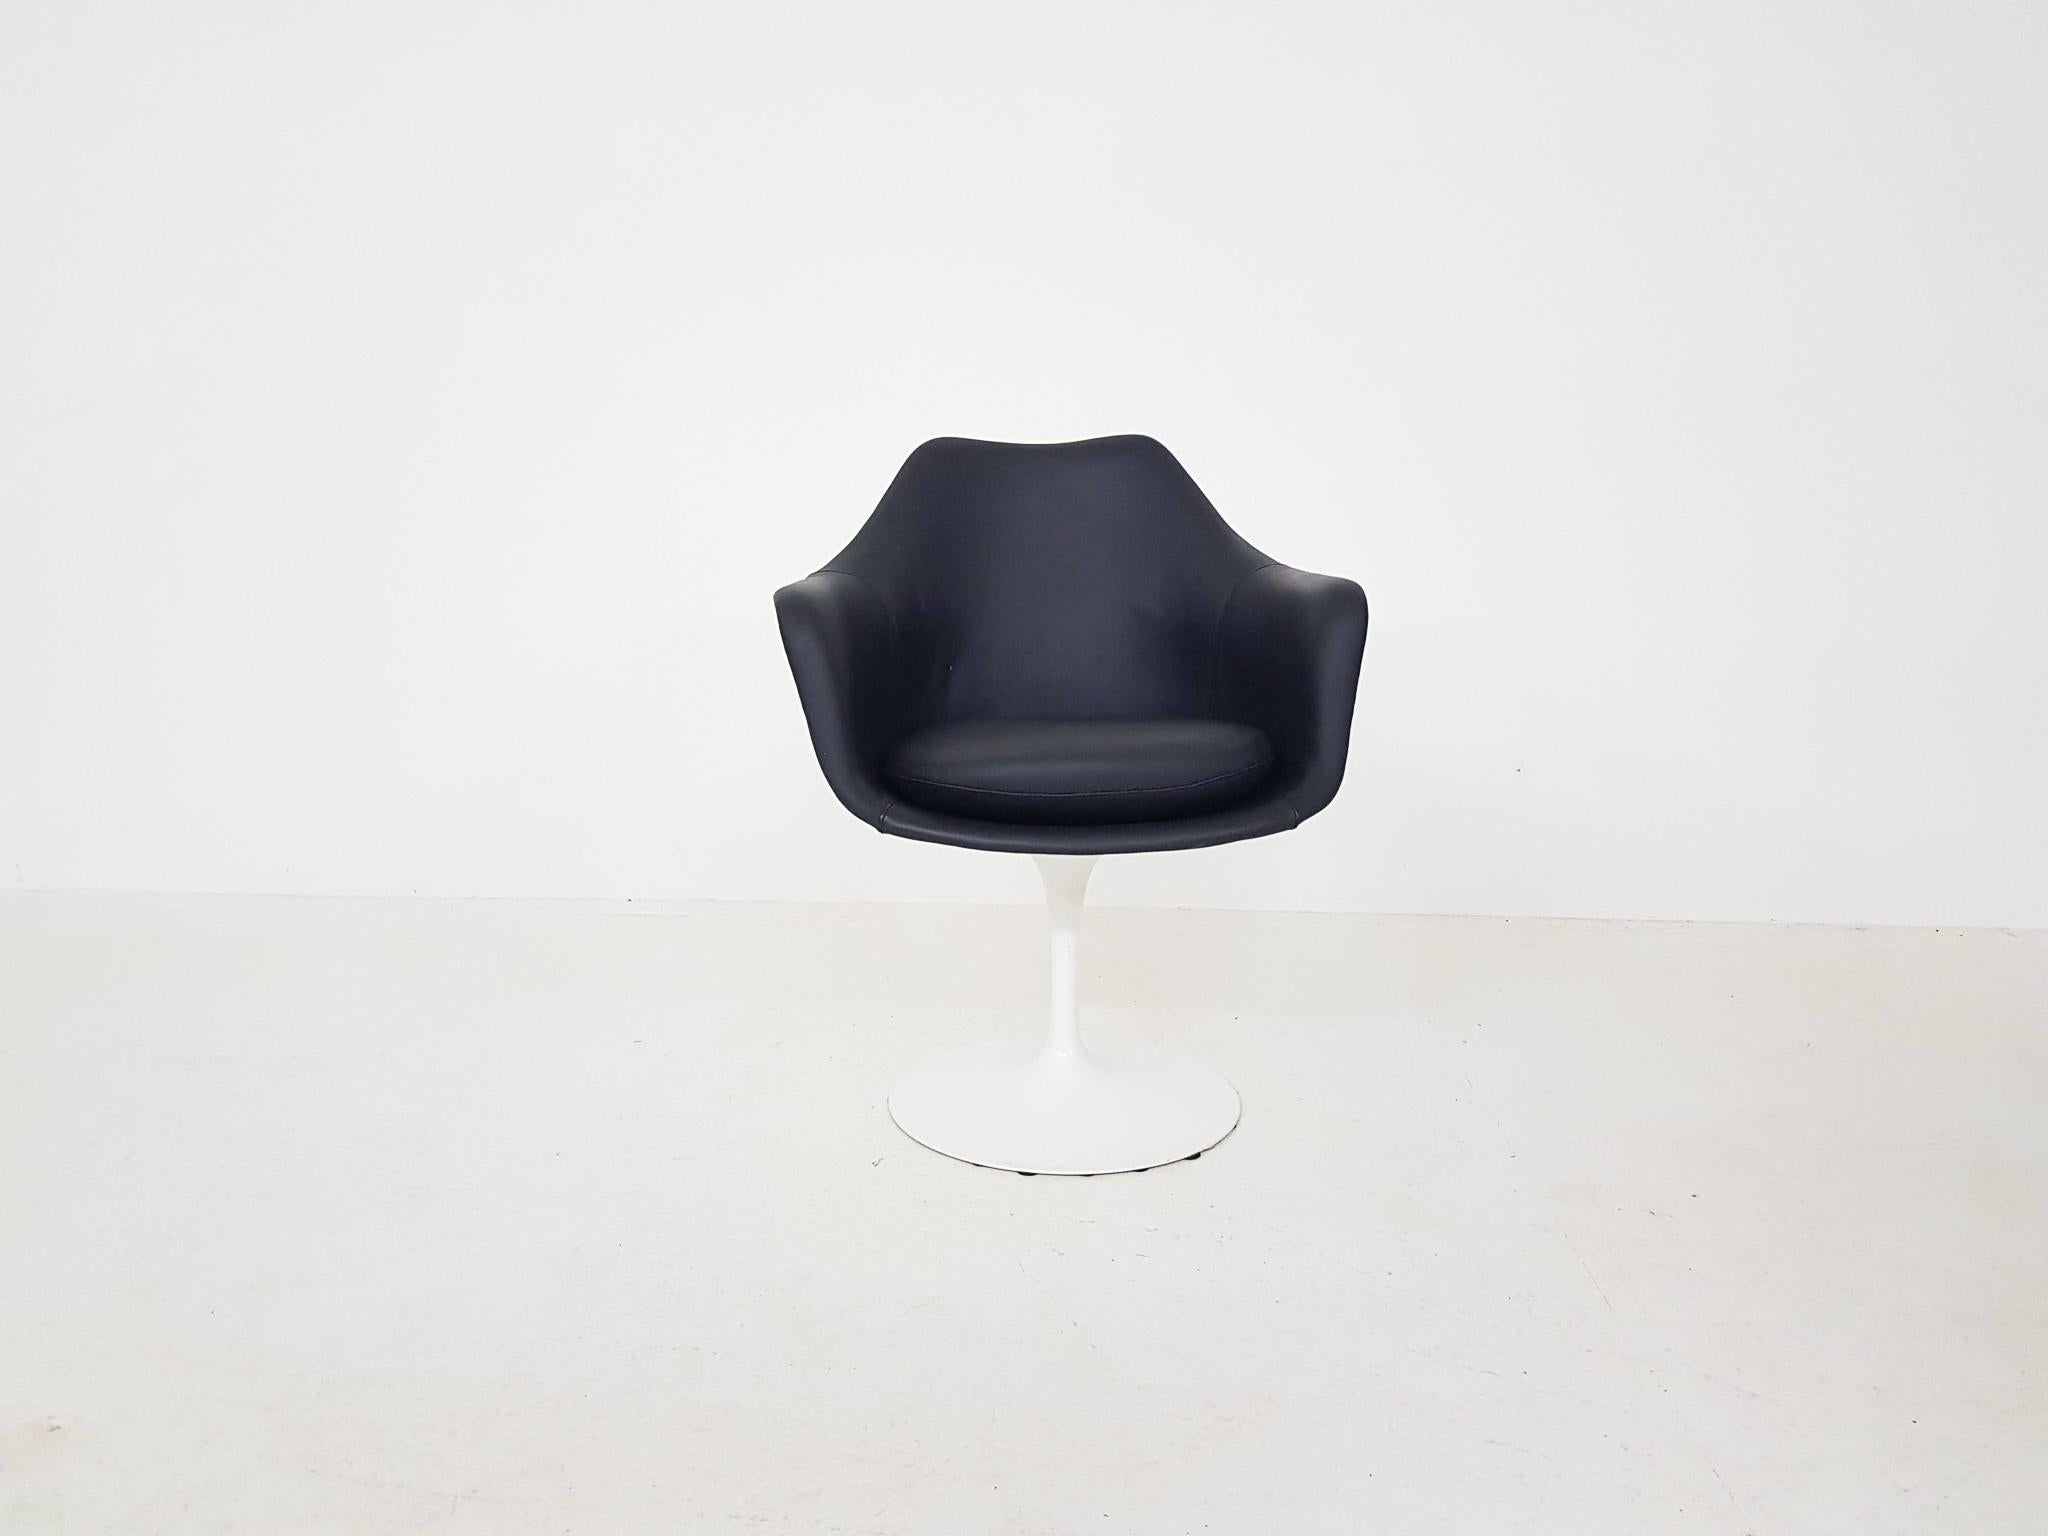 An original and vintage dark blue leather Eero Saarinen tulip dining or armchair for Knoll International, 1969.

This is an authentic dining or arm chair from Eero Saarinen for Knoll International. This chair was once used in the city hall wedding